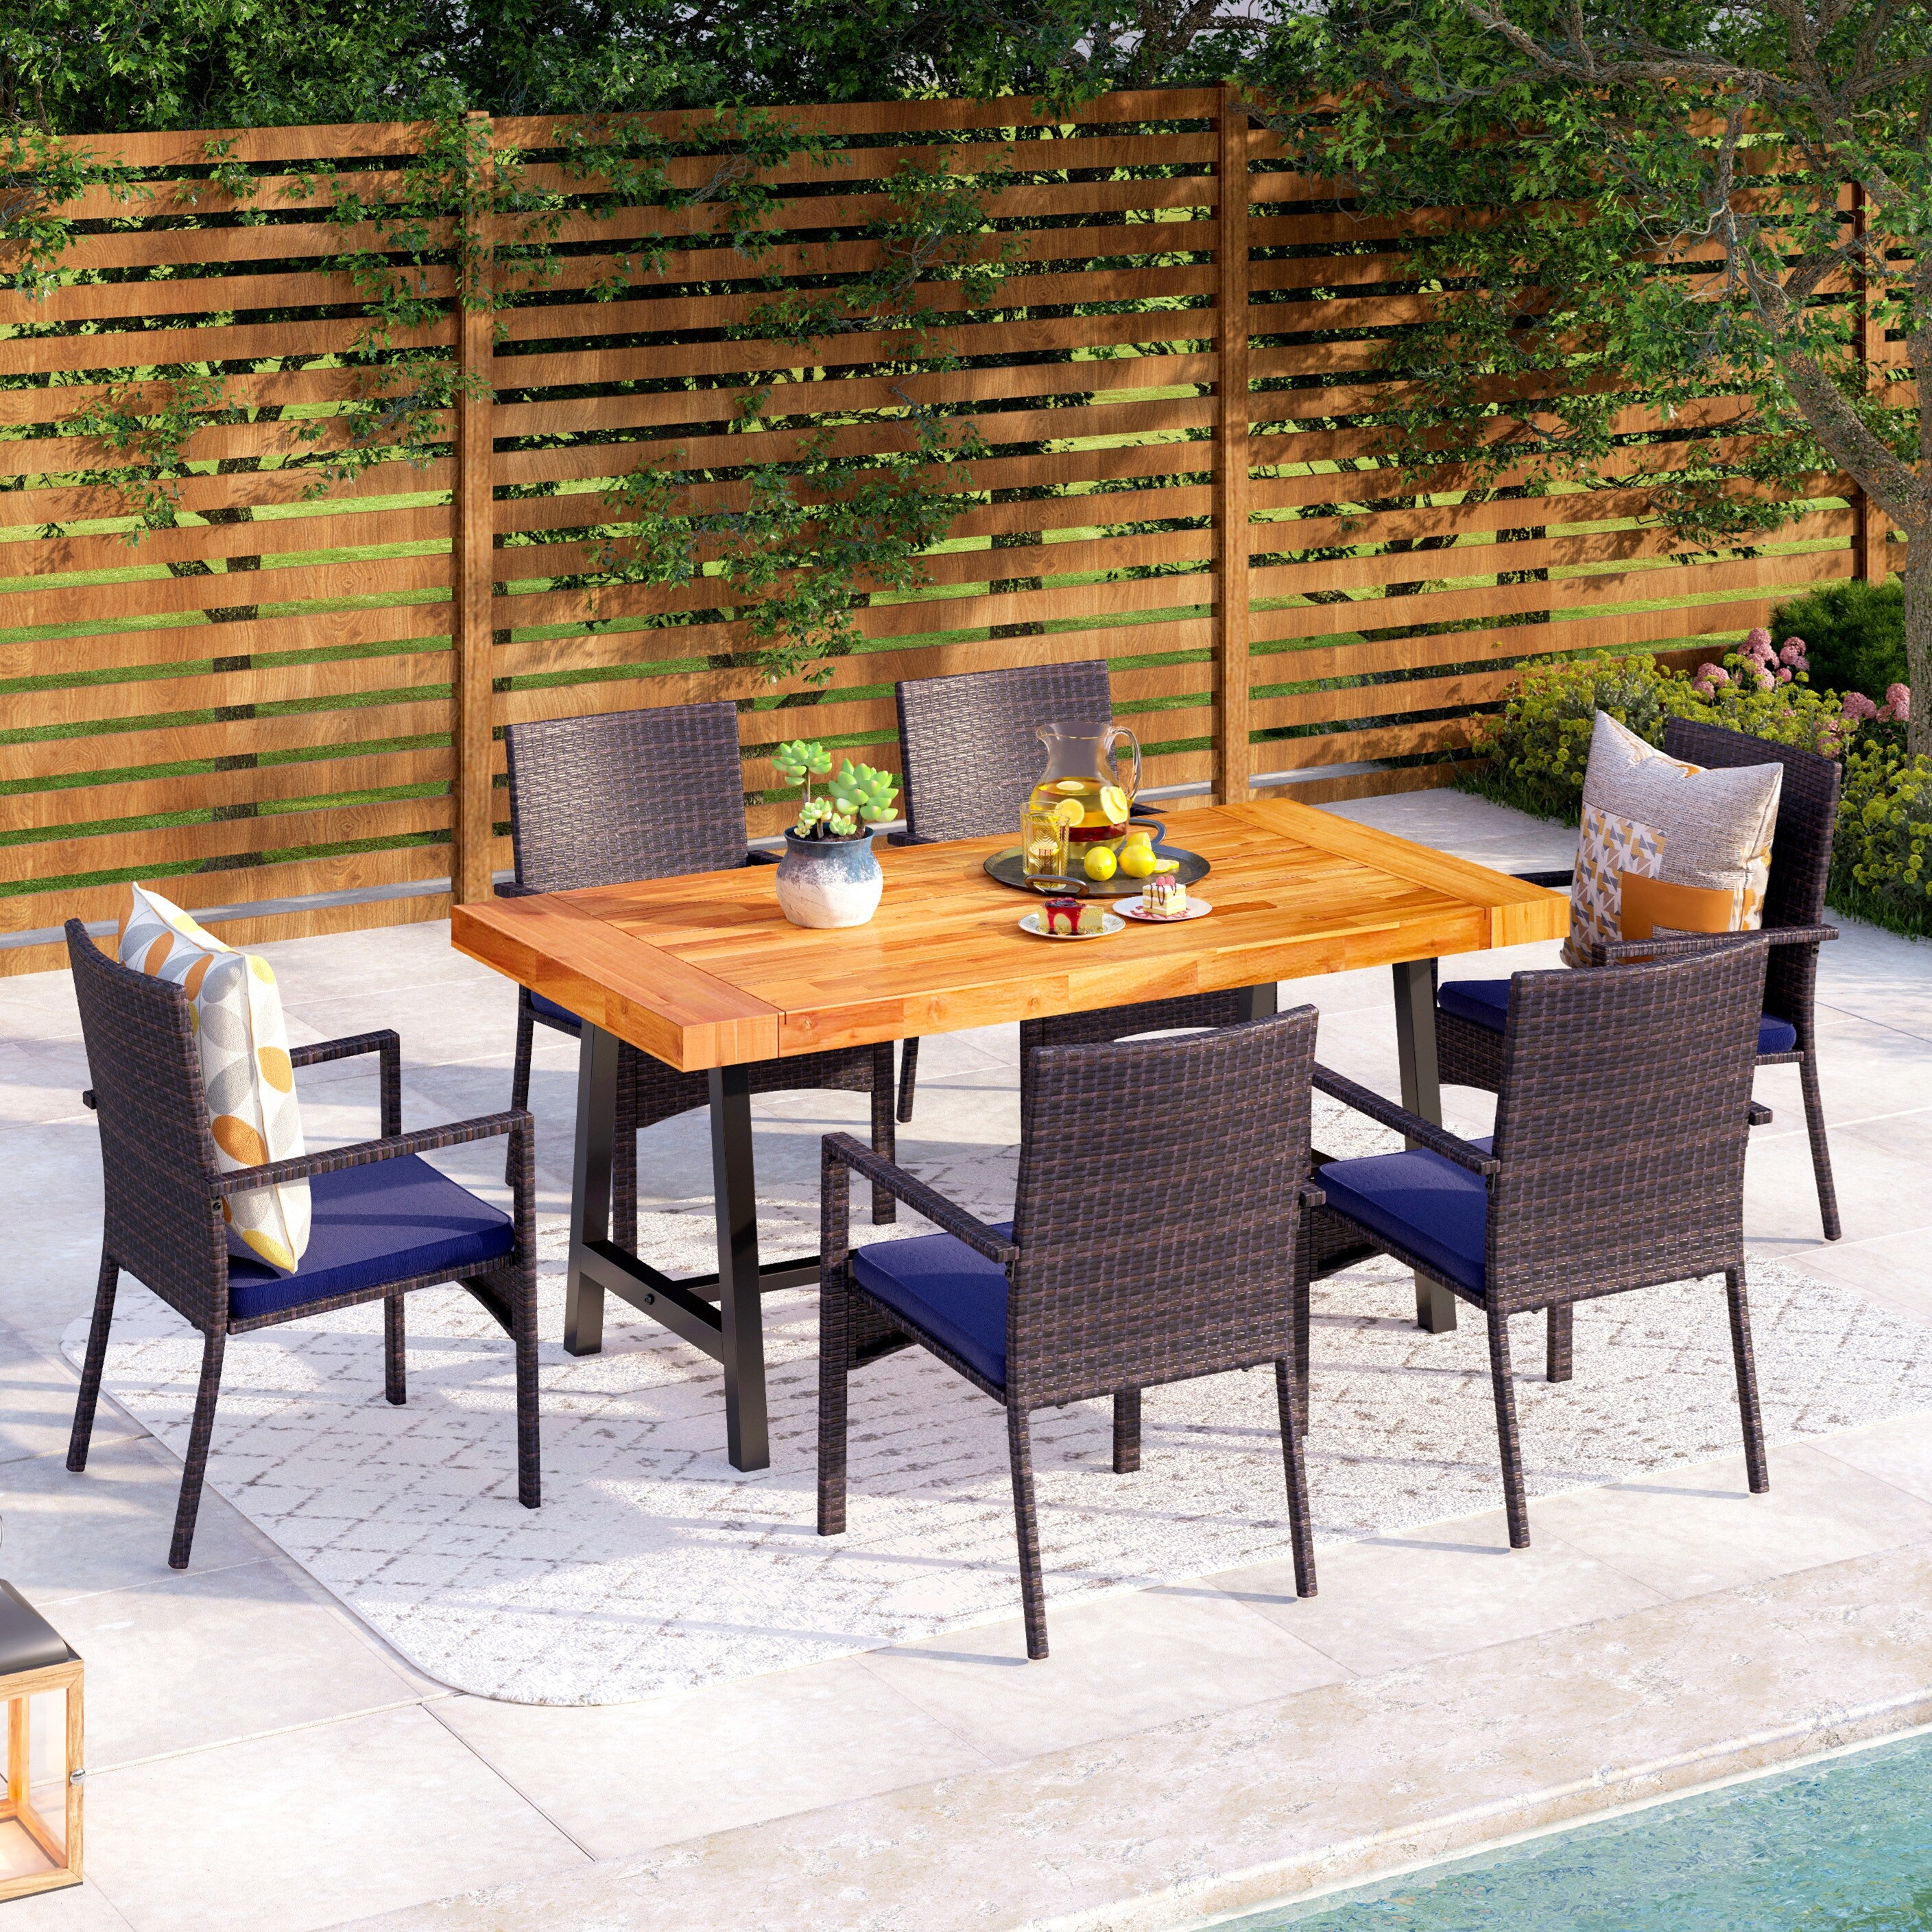 7-piece Outdoor Patio Dining Set 1 Acacia Wood Table and 6 Cushioned Rattan Chairs